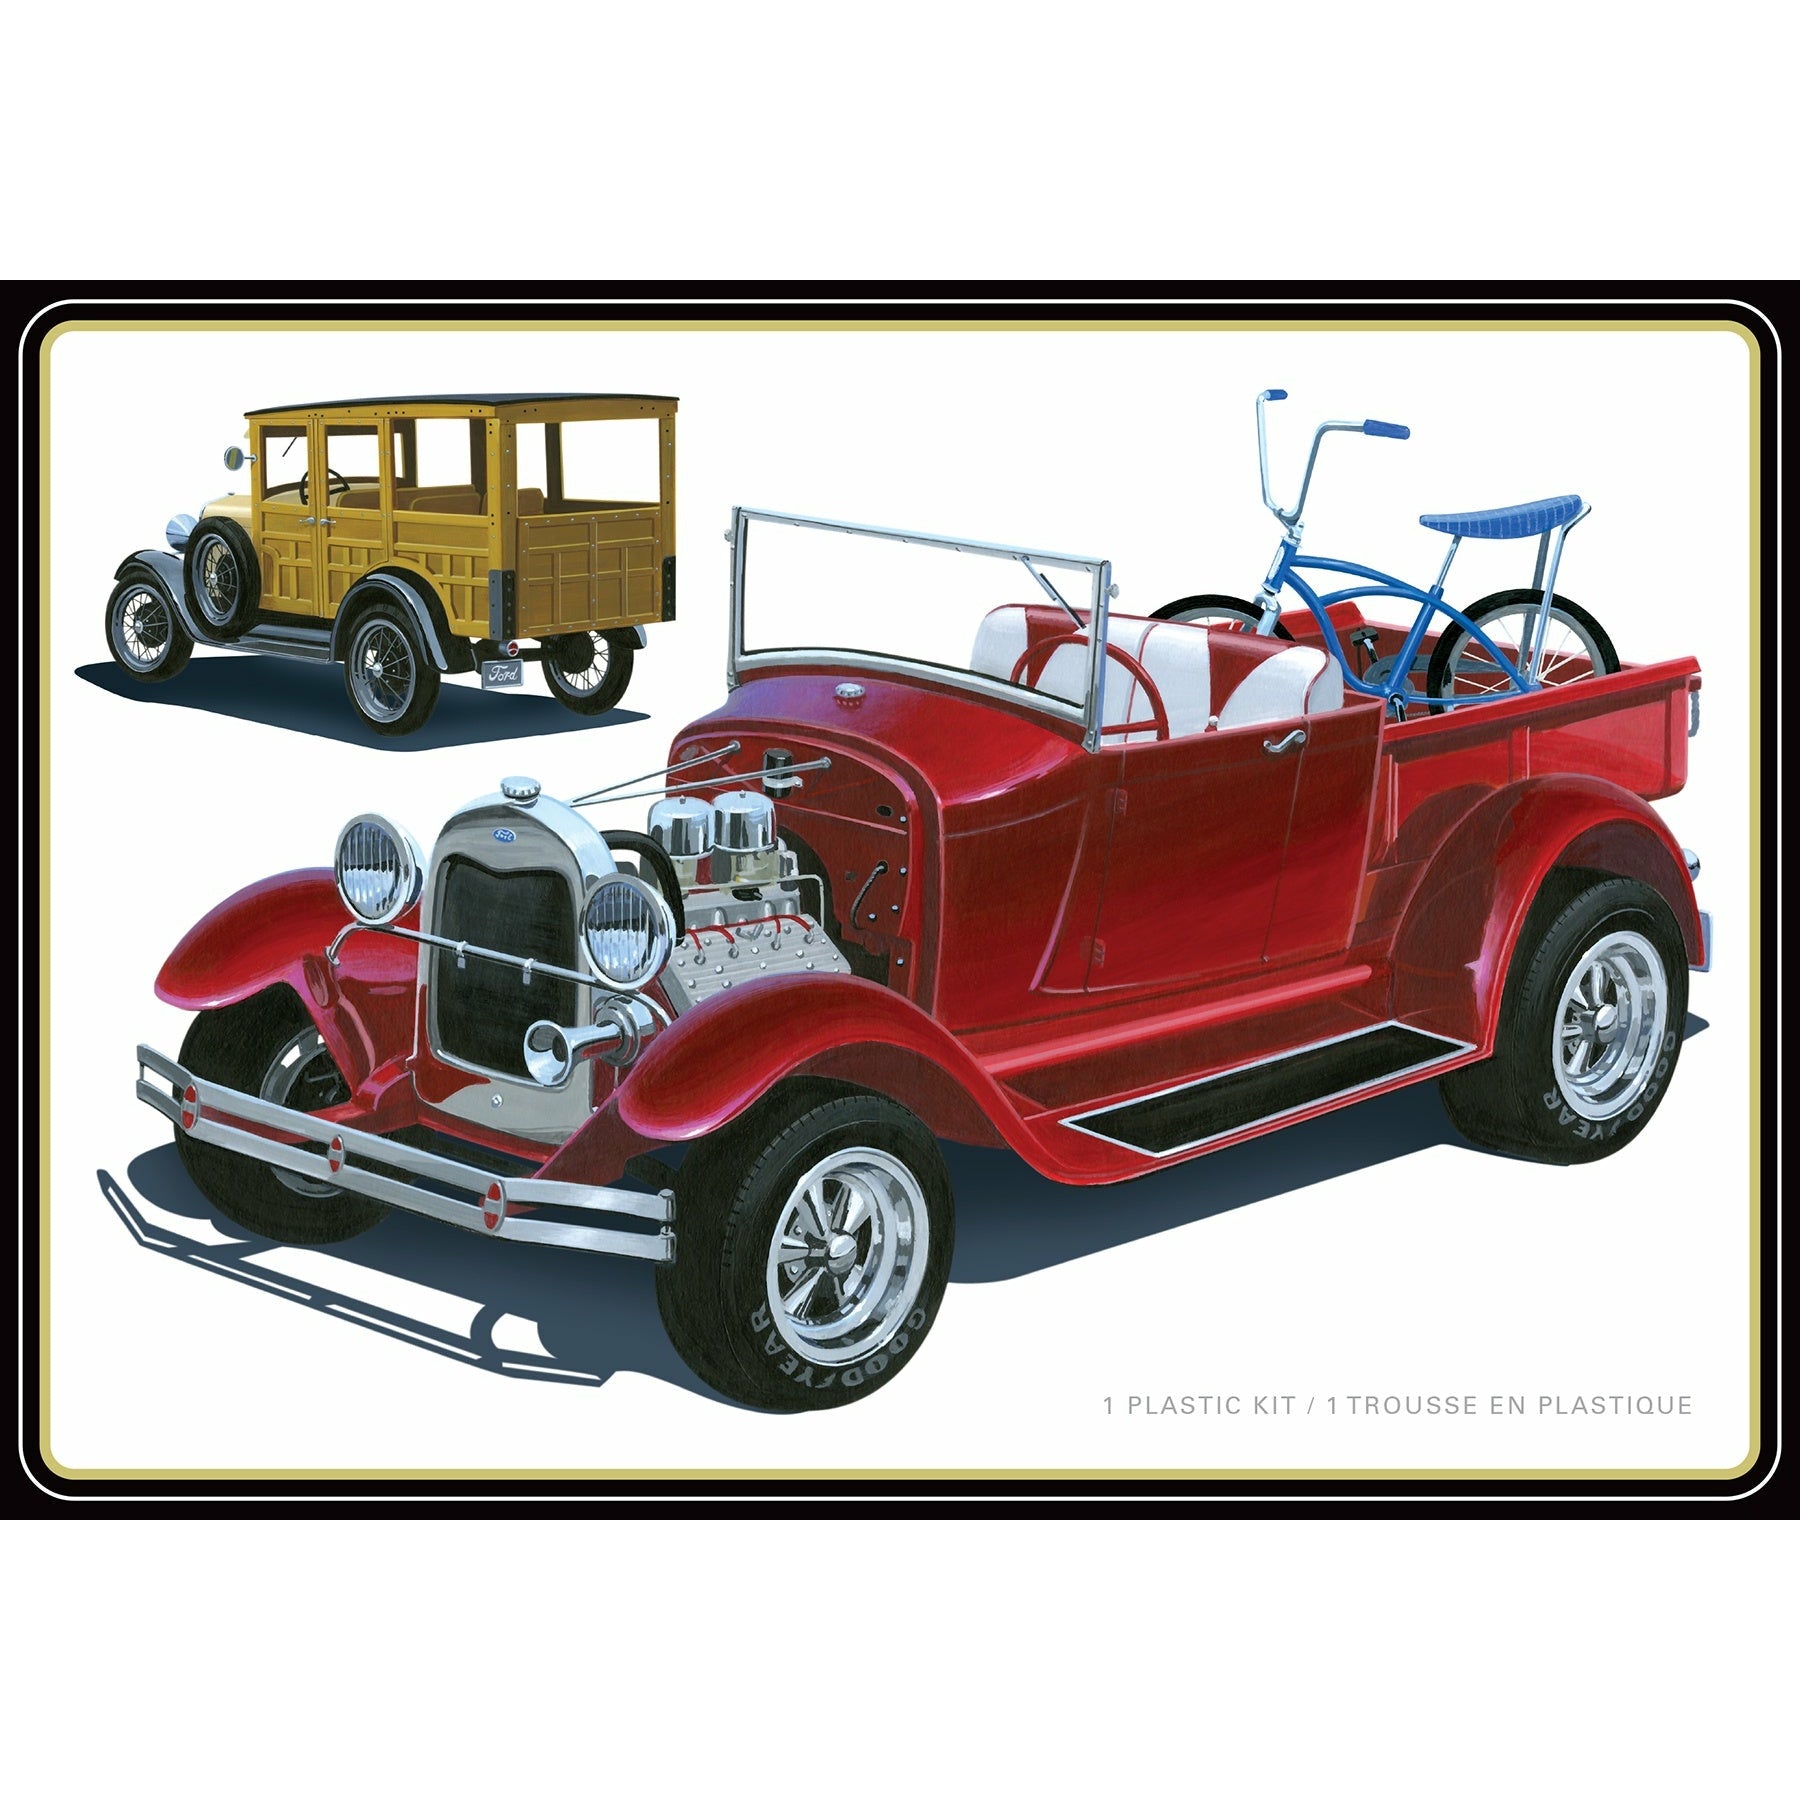 1929 Ford Woody Pickup 1/25 Model Truck Kit #1269 by AMT